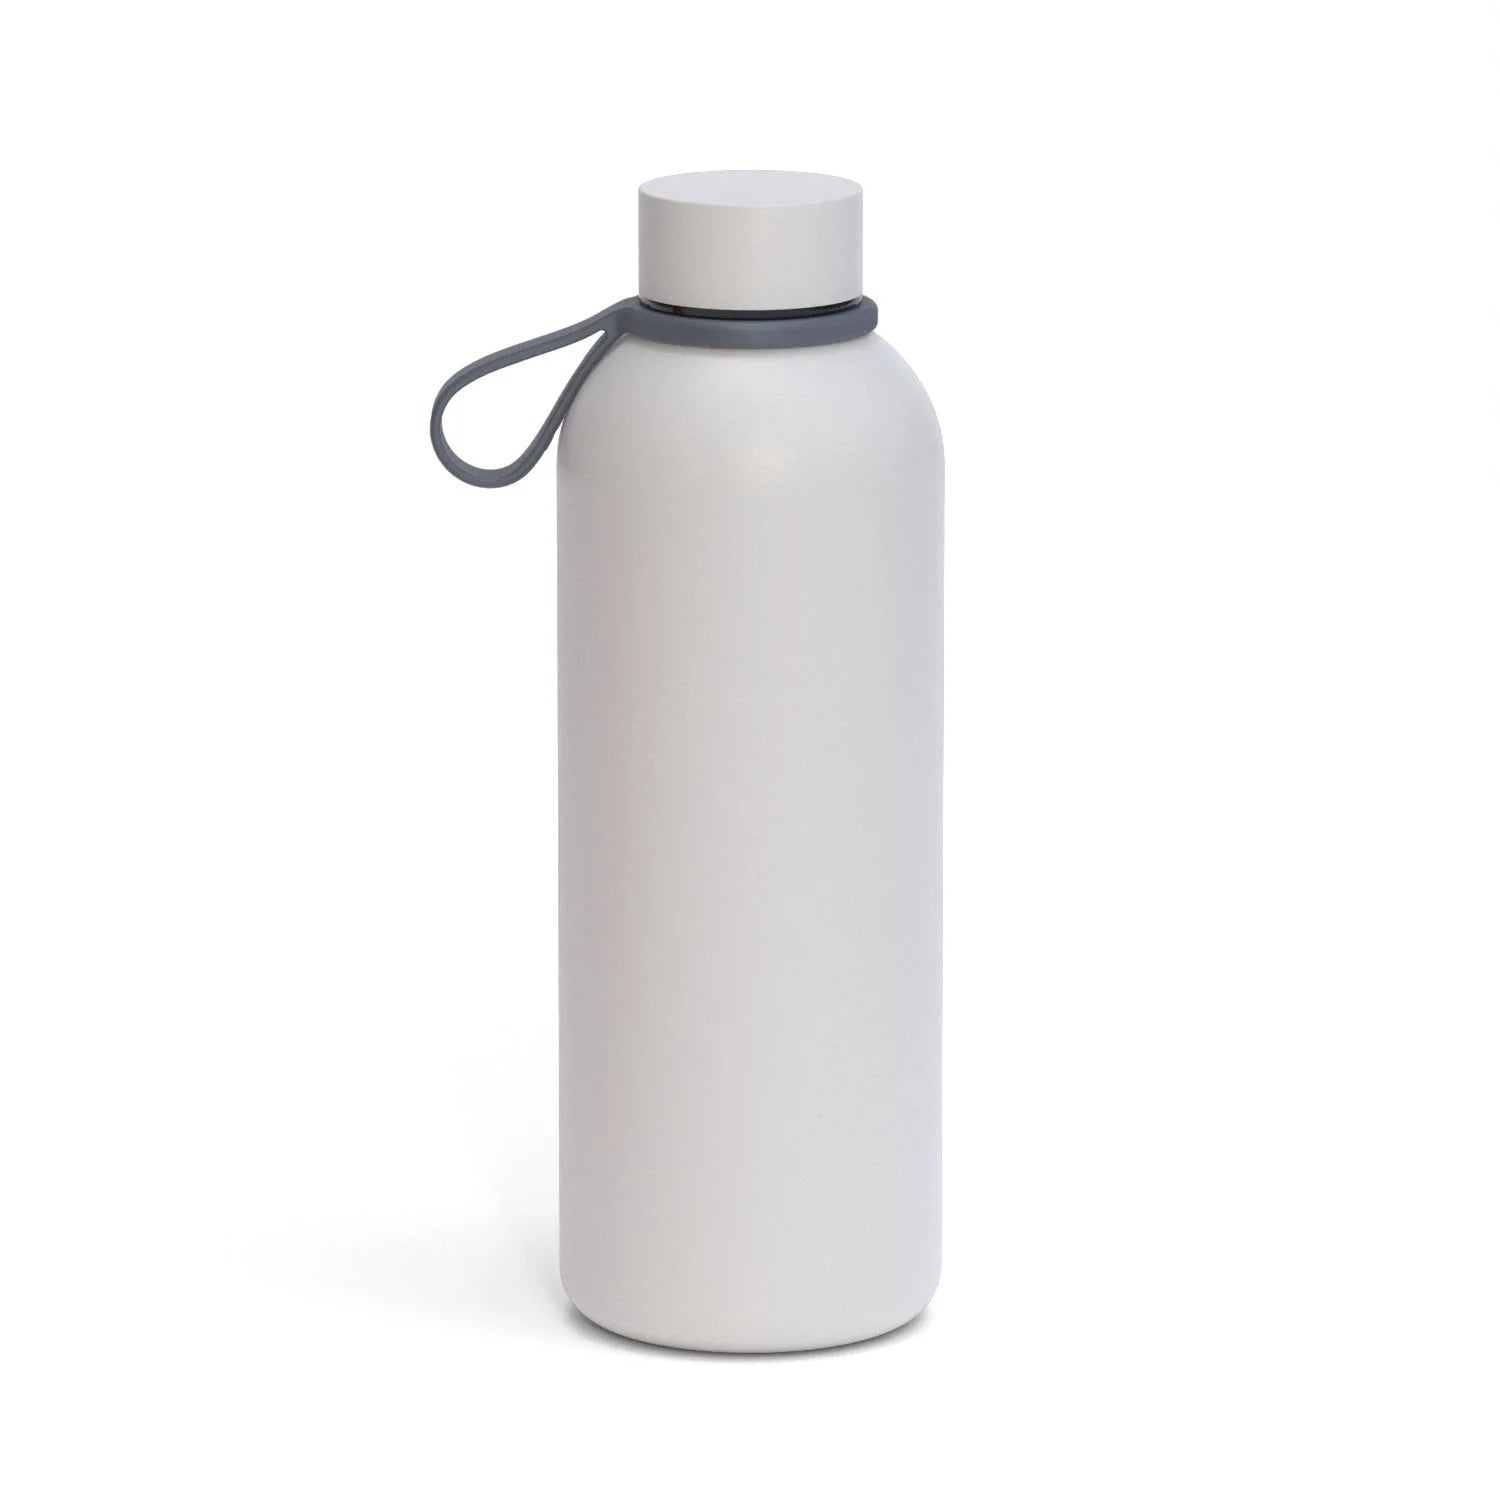 Insulated Stainless Steel Bottle - Cloud Grey - 500ml